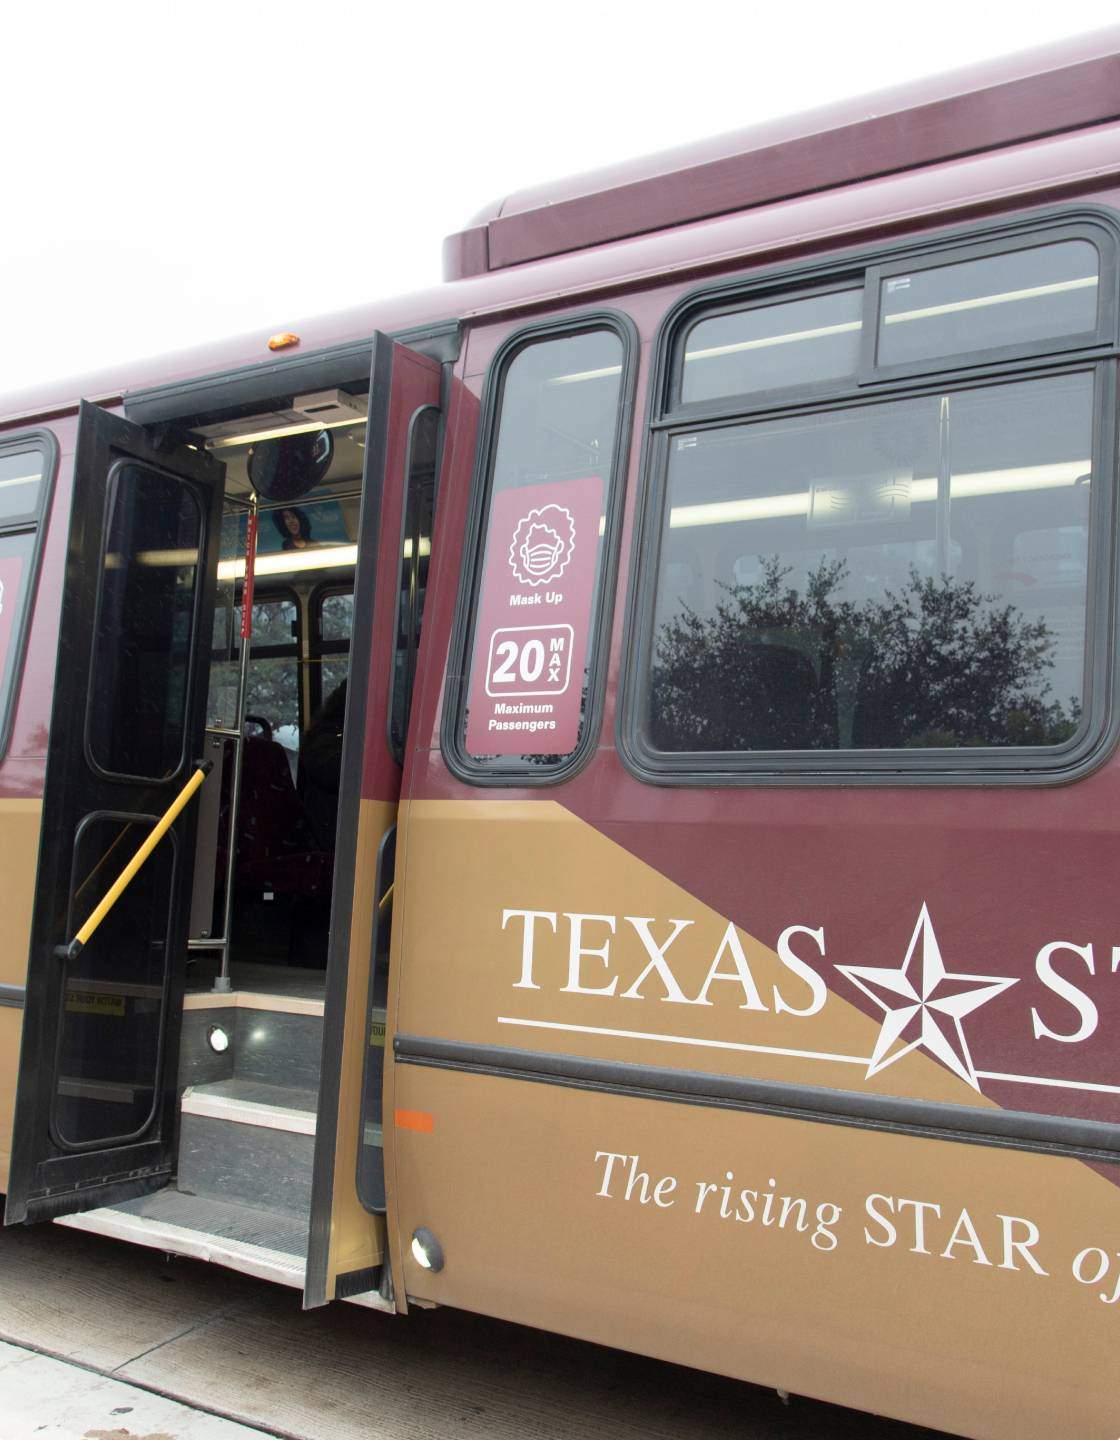 show respect poster on texas state bus